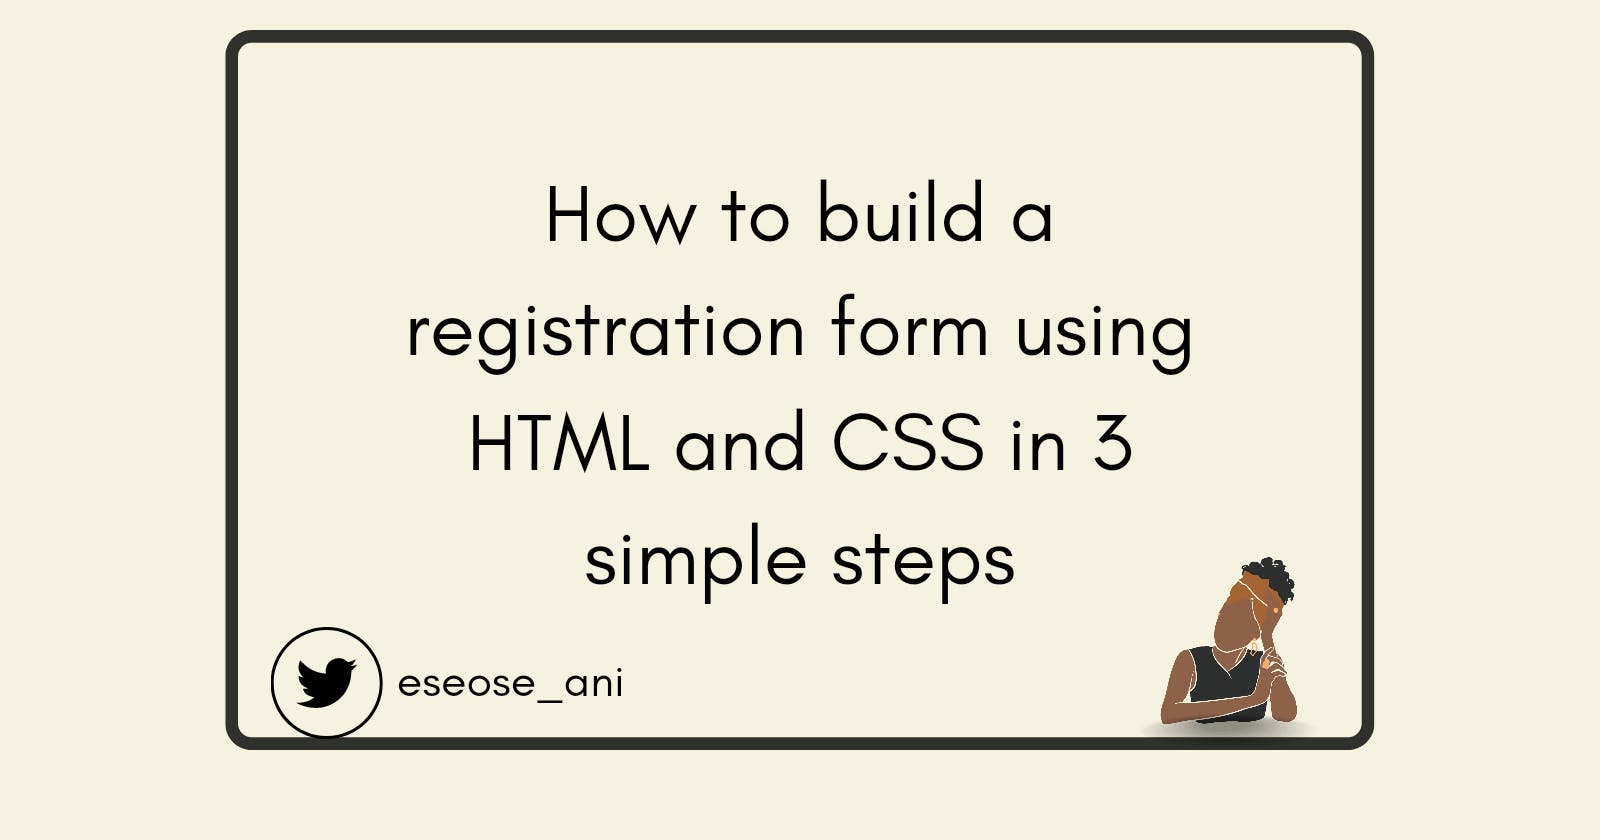 How to build a registration form using HTML and CSS in 3 simple steps